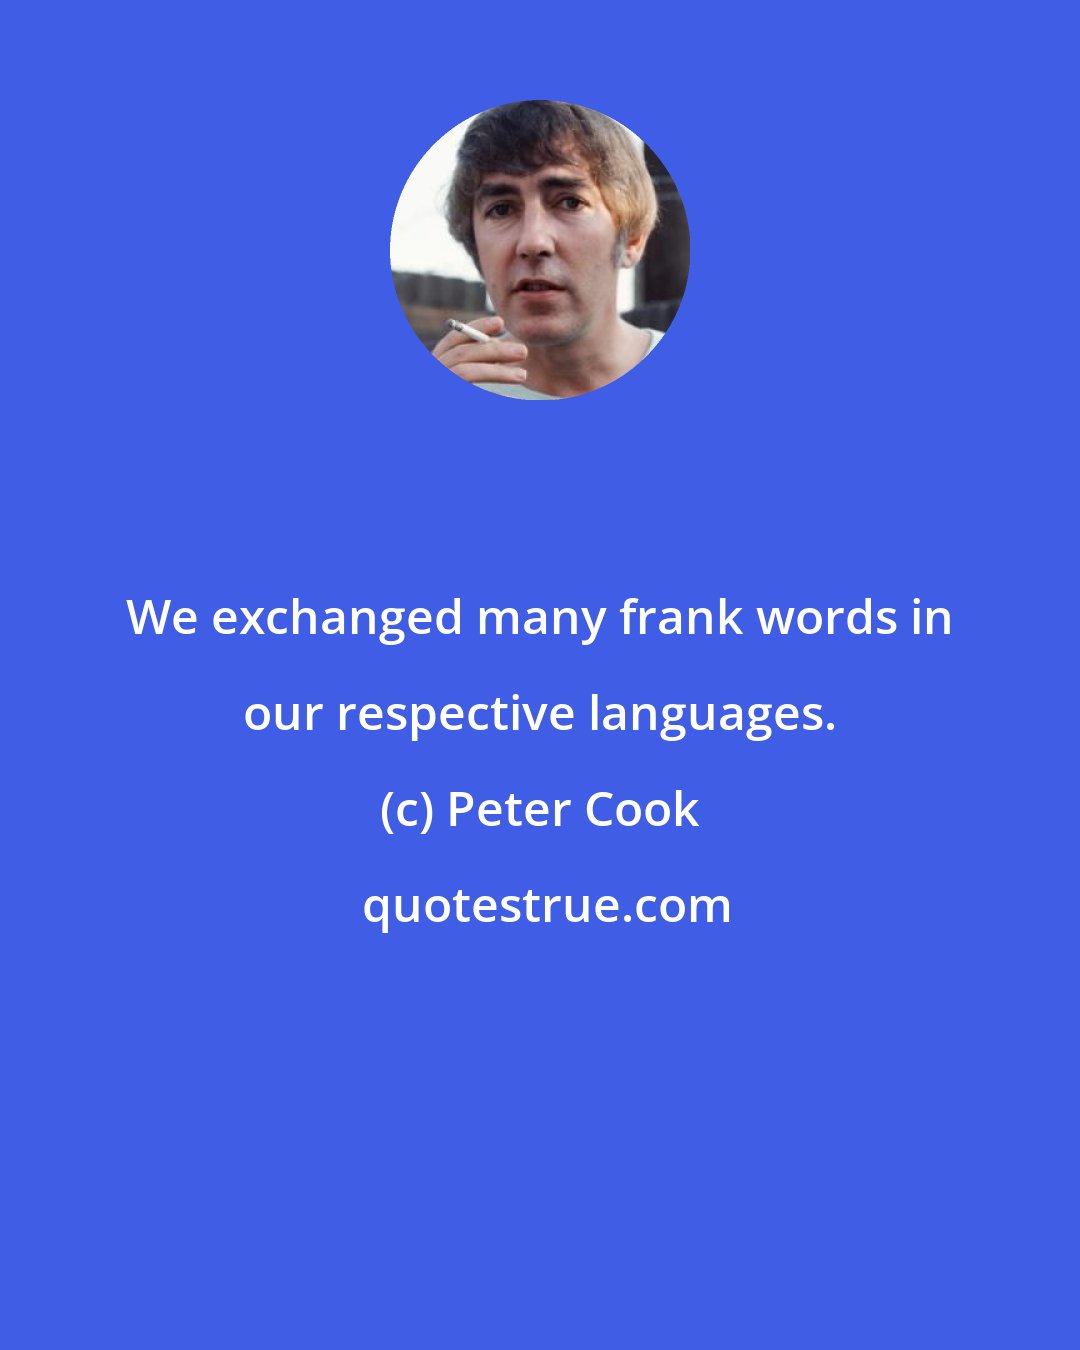 Peter Cook: We exchanged many frank words in our respective languages.